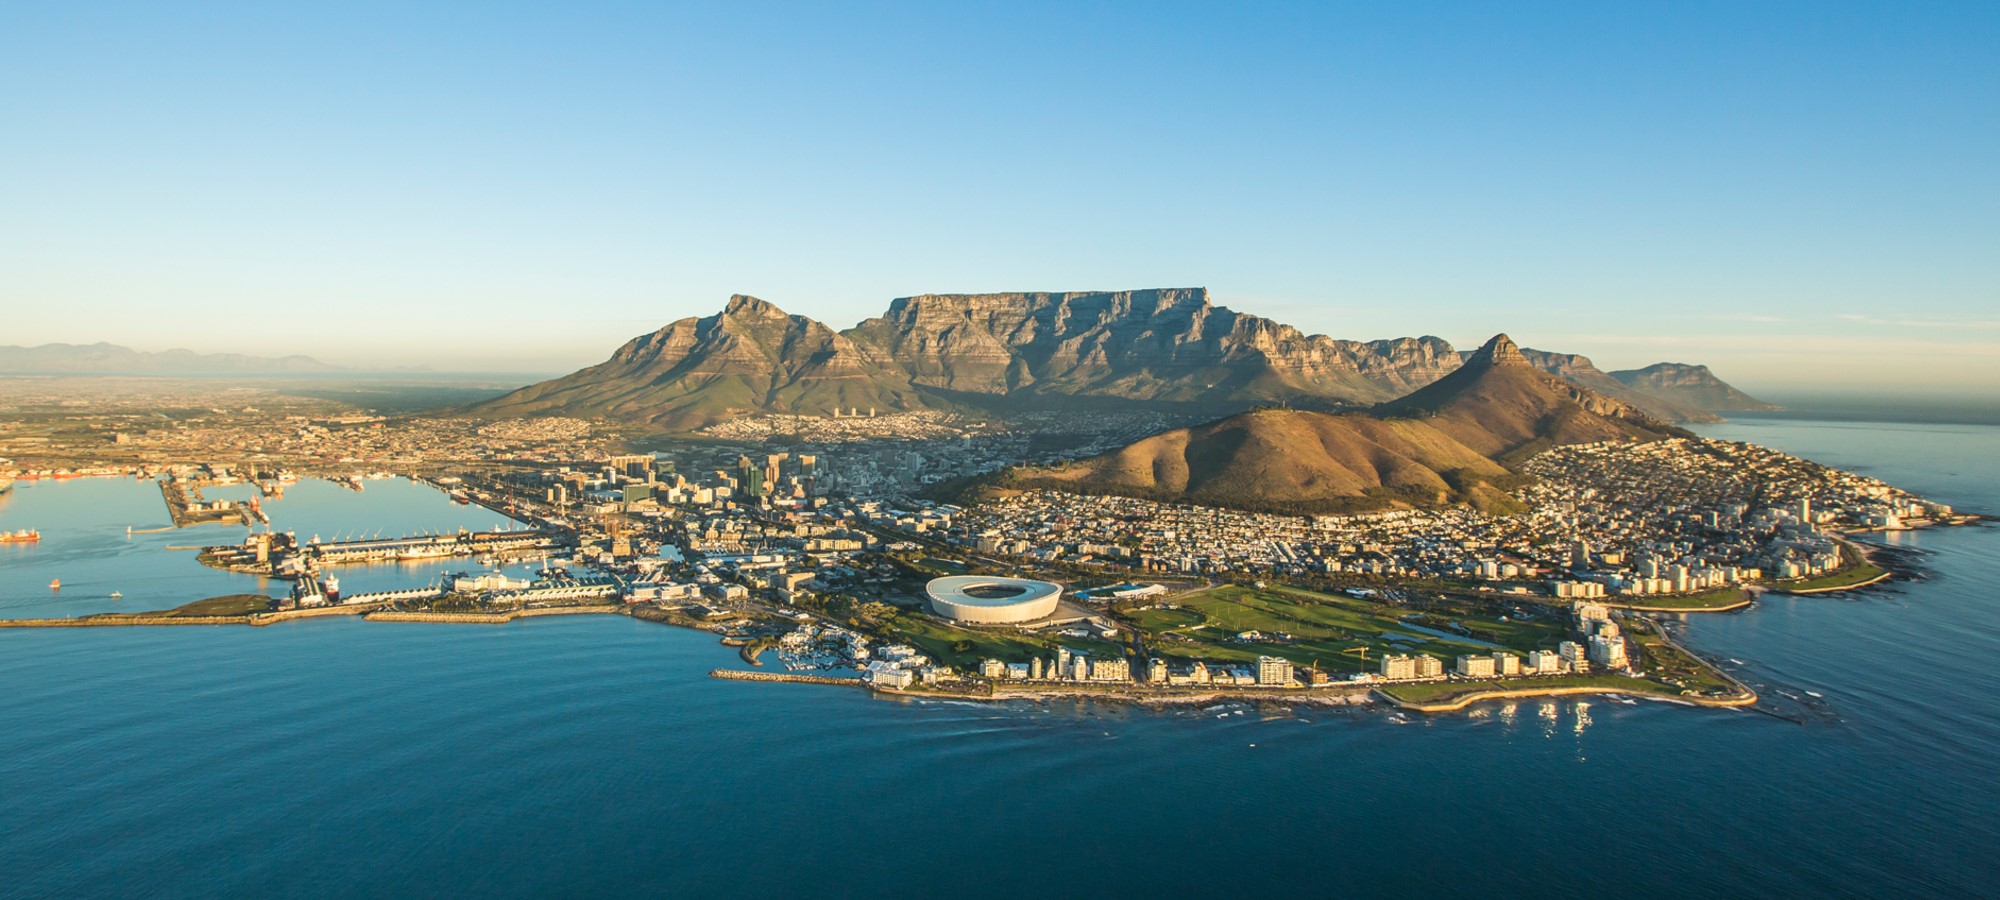 south africa top destinations